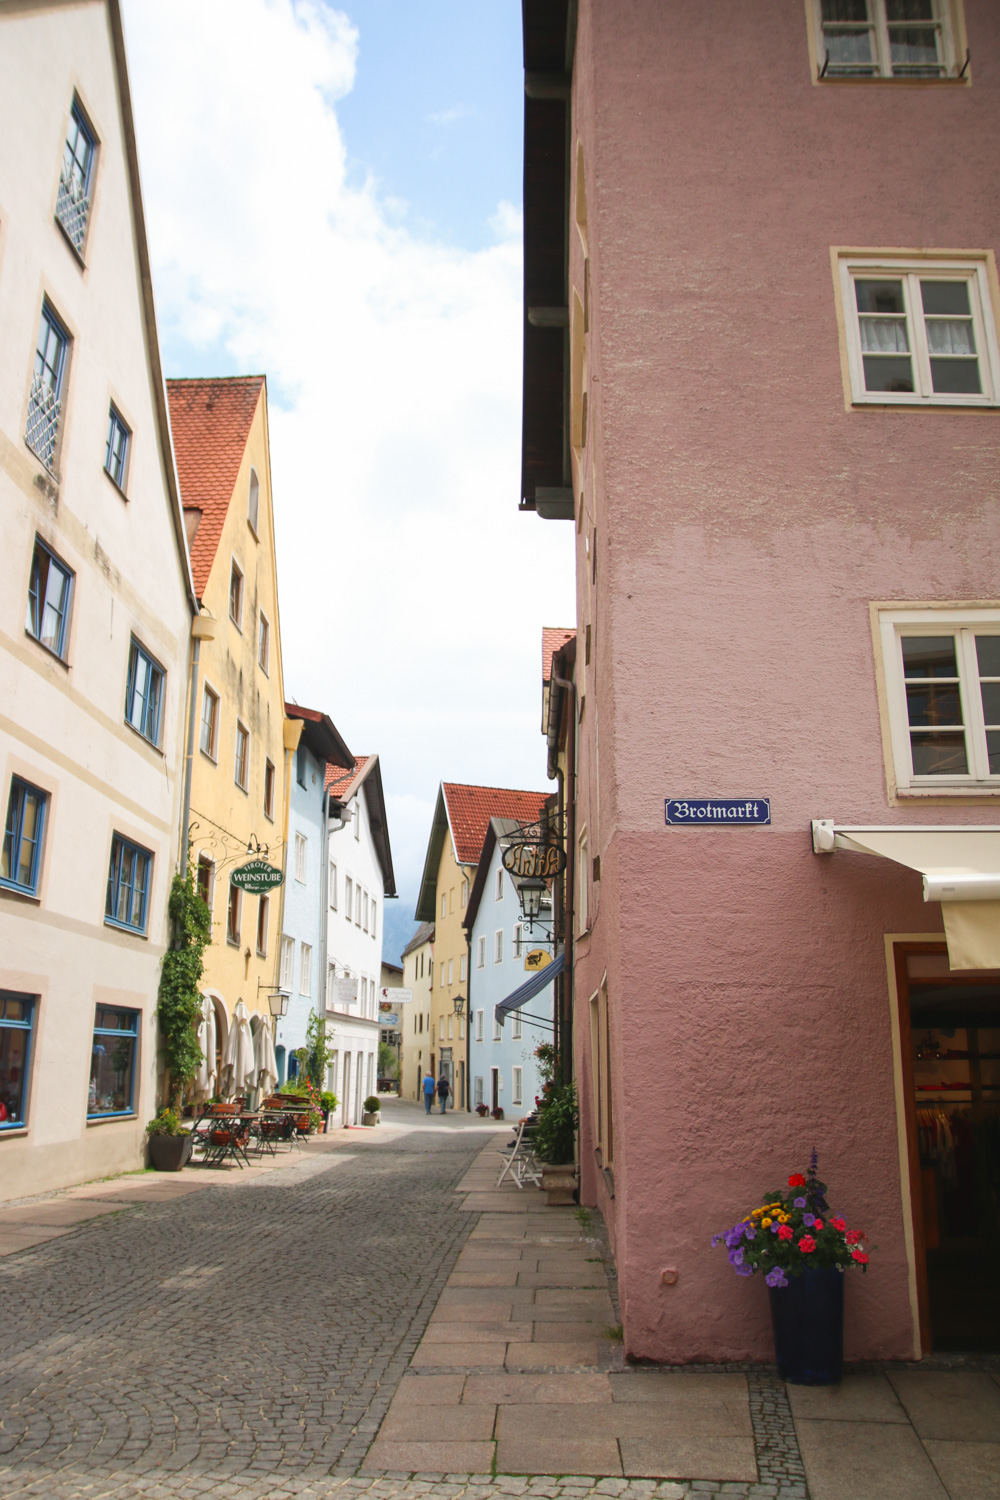 The Colourful town of Fussen, Germany